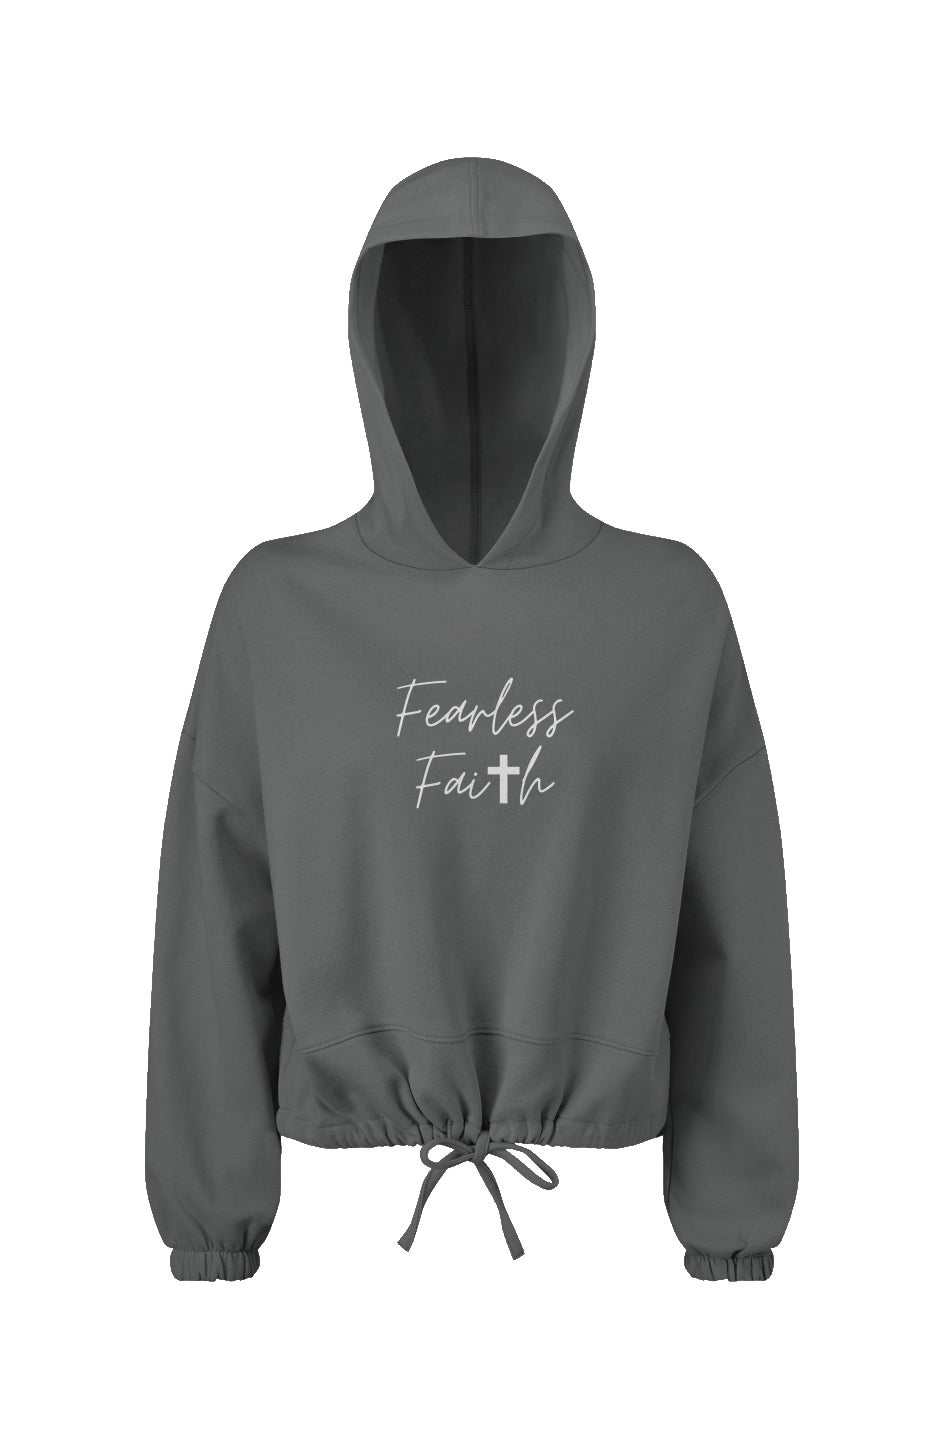 Fearless Faith Ladies' Cropped Oversize Hooded Sweatshirt